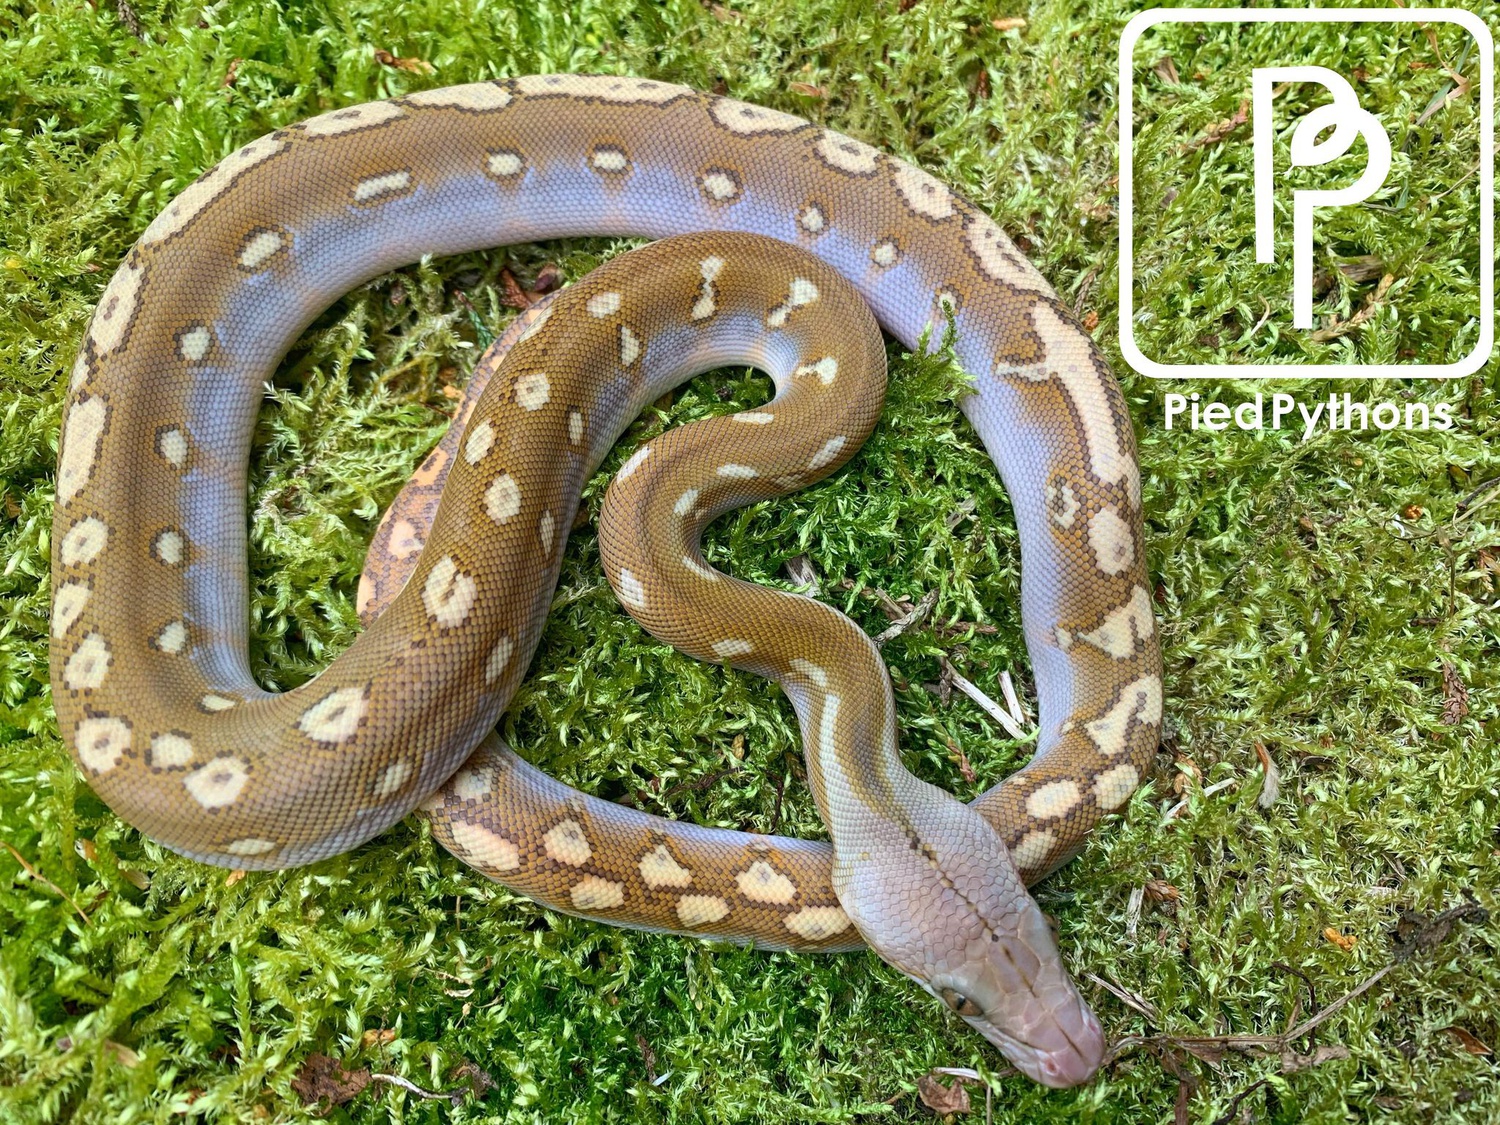 Amber (Bacon Het Ogs) Reticulated Python by Pied Pythons